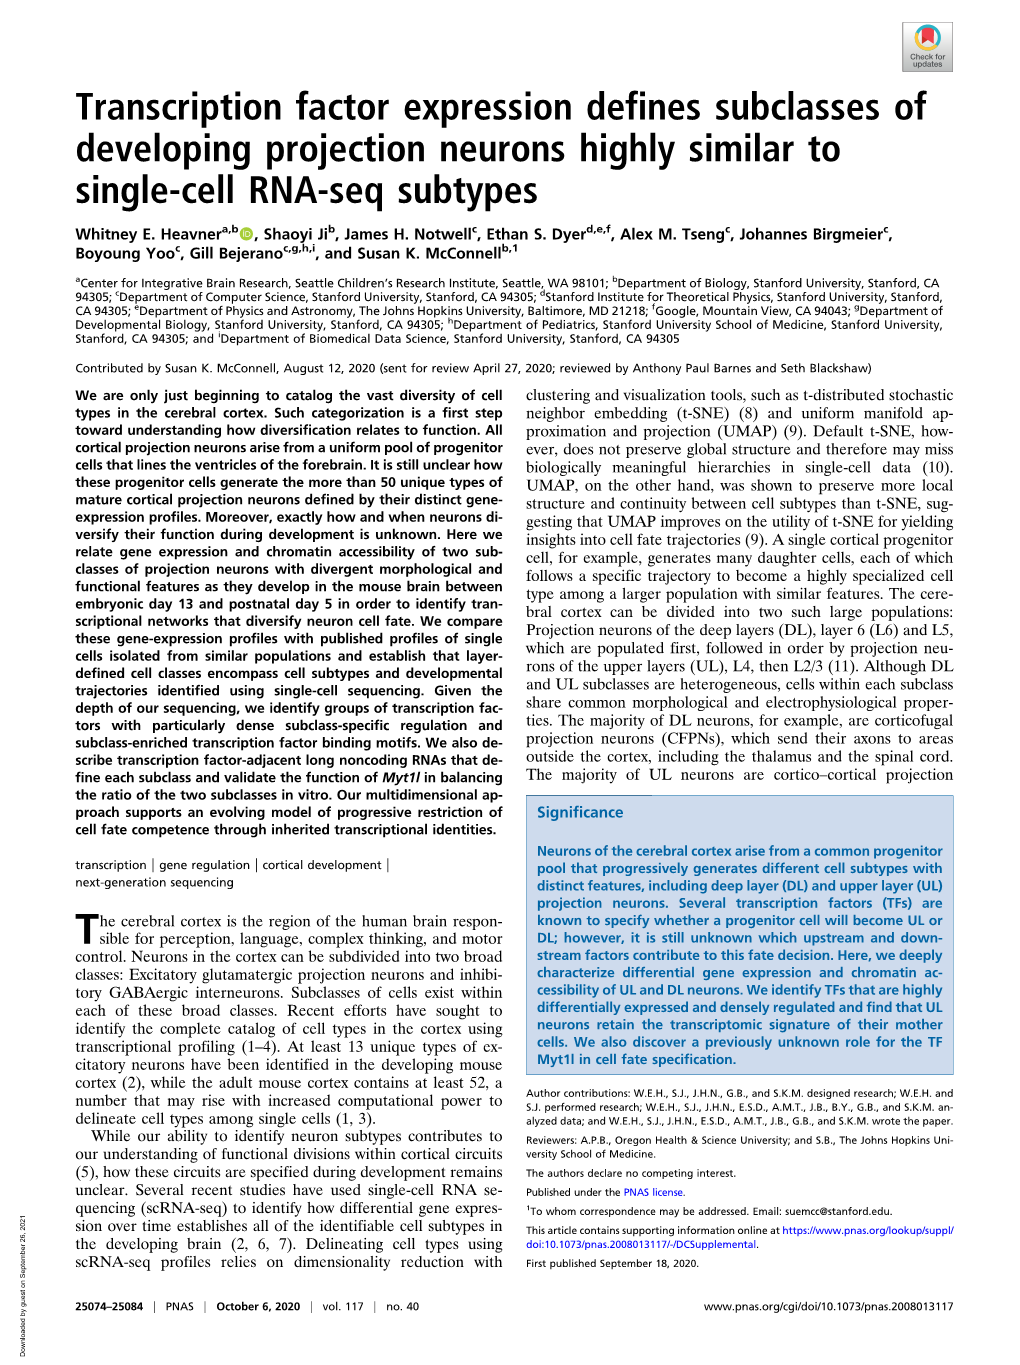 Transcription Factor Expression Defines Subclasses of Developing Projection Neurons Highly Similar to Single-Cell RNA-Seq Subtypes